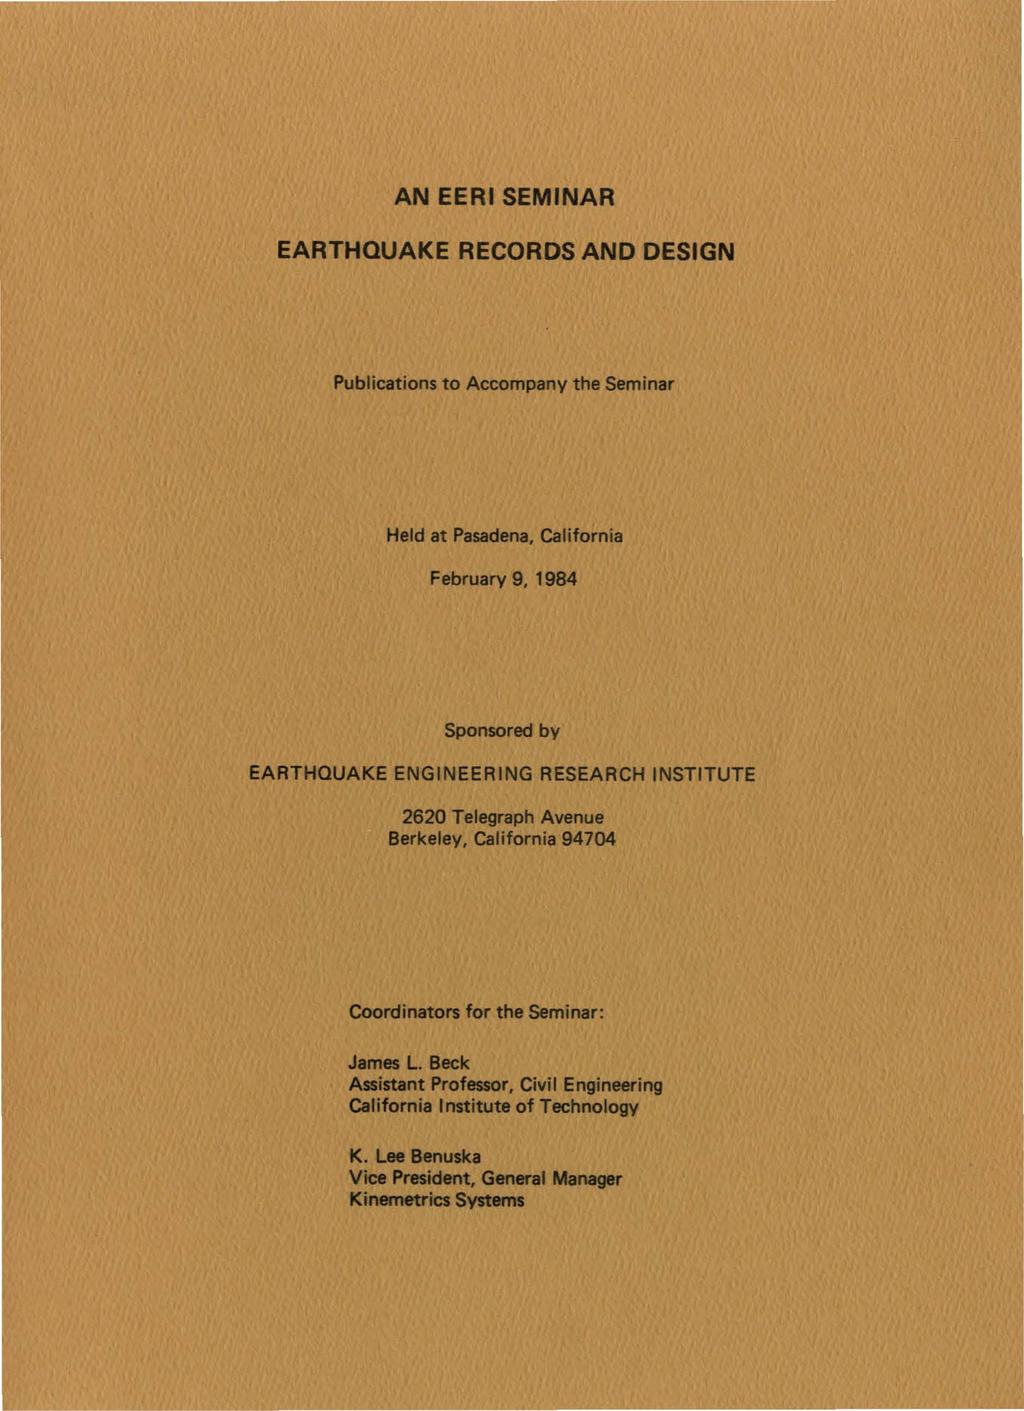 AN EERI SEMINAR EARTHQUAKE RECORDS AND DESIGN Publications to Accompany the Seminar Held at Pasadena, California February 9, 1984 Sponsored by EARTHQUAKE ENGINEERING RESEARCH INSTITUTE 2620 Telegraph